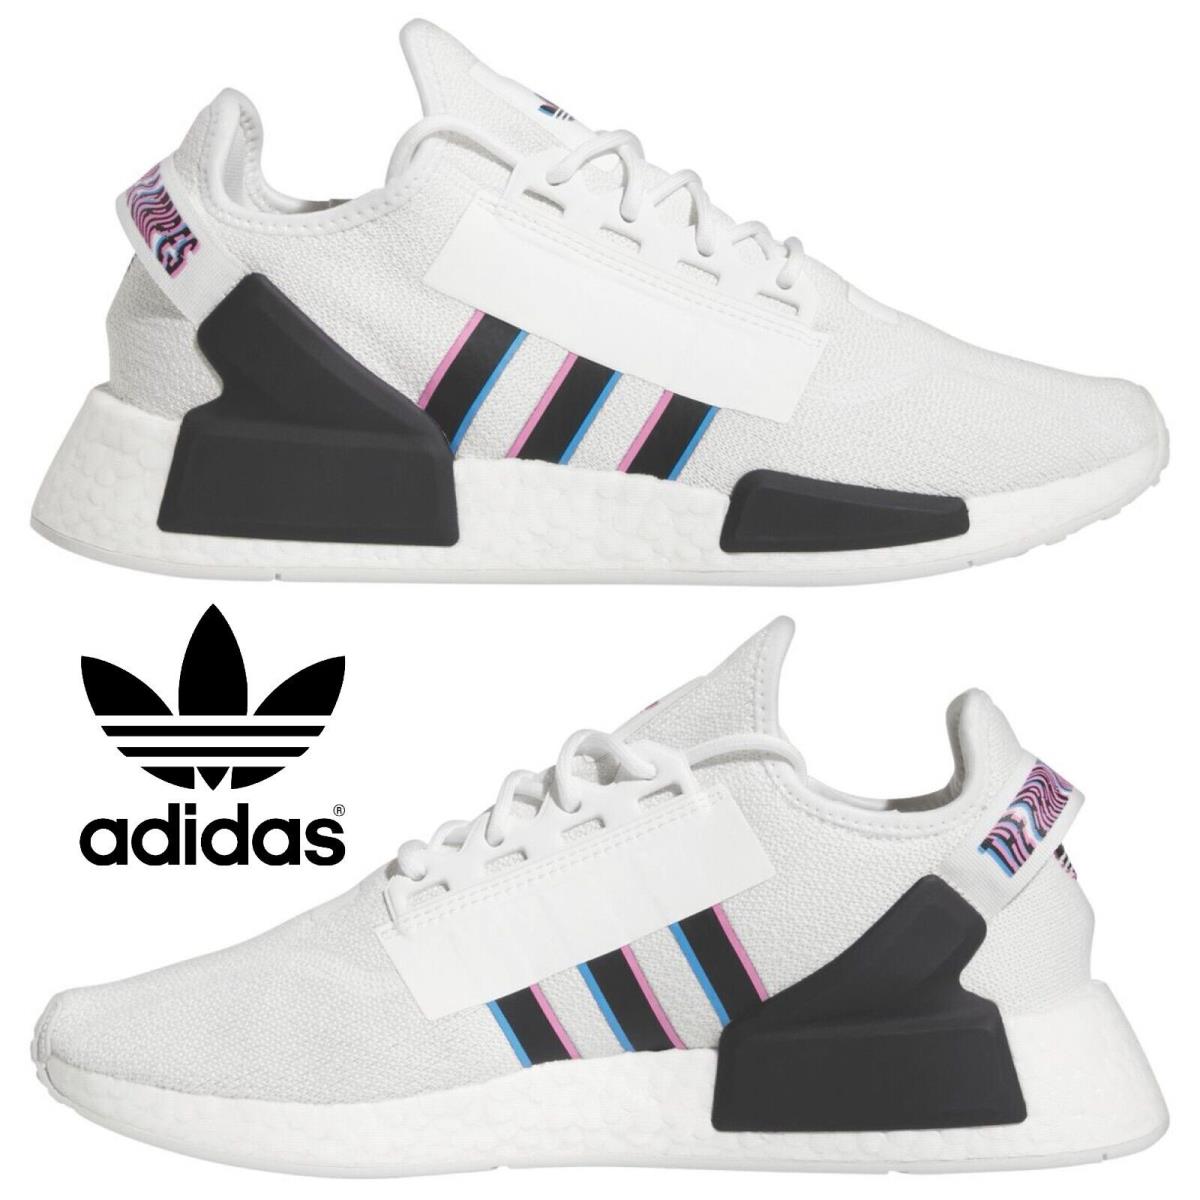 Adidas Originals Nmd R1 Men`s Sneakers Running Shoes Gym Casual Sport White - White, Manufacturer: White